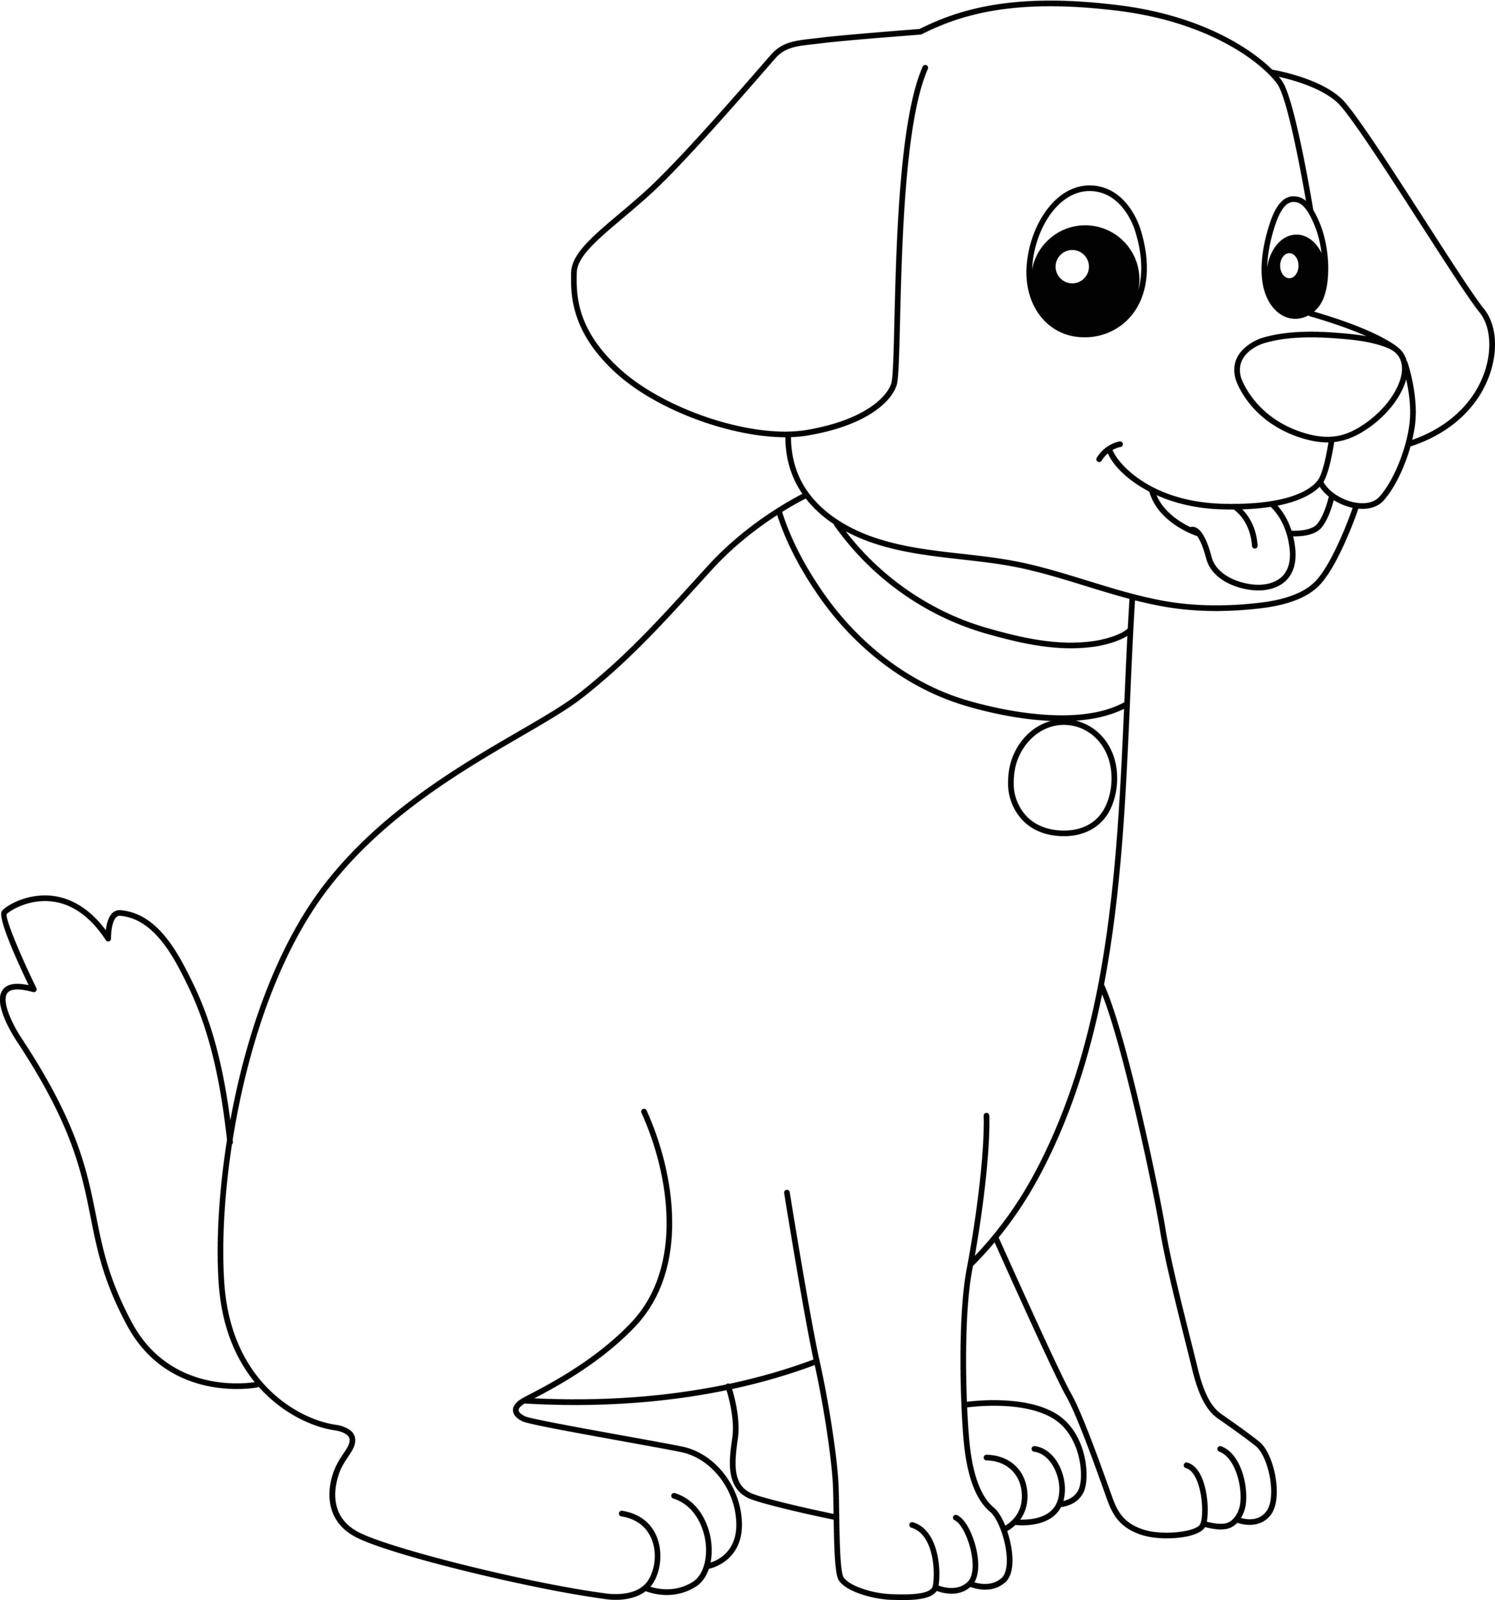 A cute and funny coloring page of a dog farm animal. Provides hours of coloring fun for children. To color, this page is very easy. Suitable for little kids and toddlers.